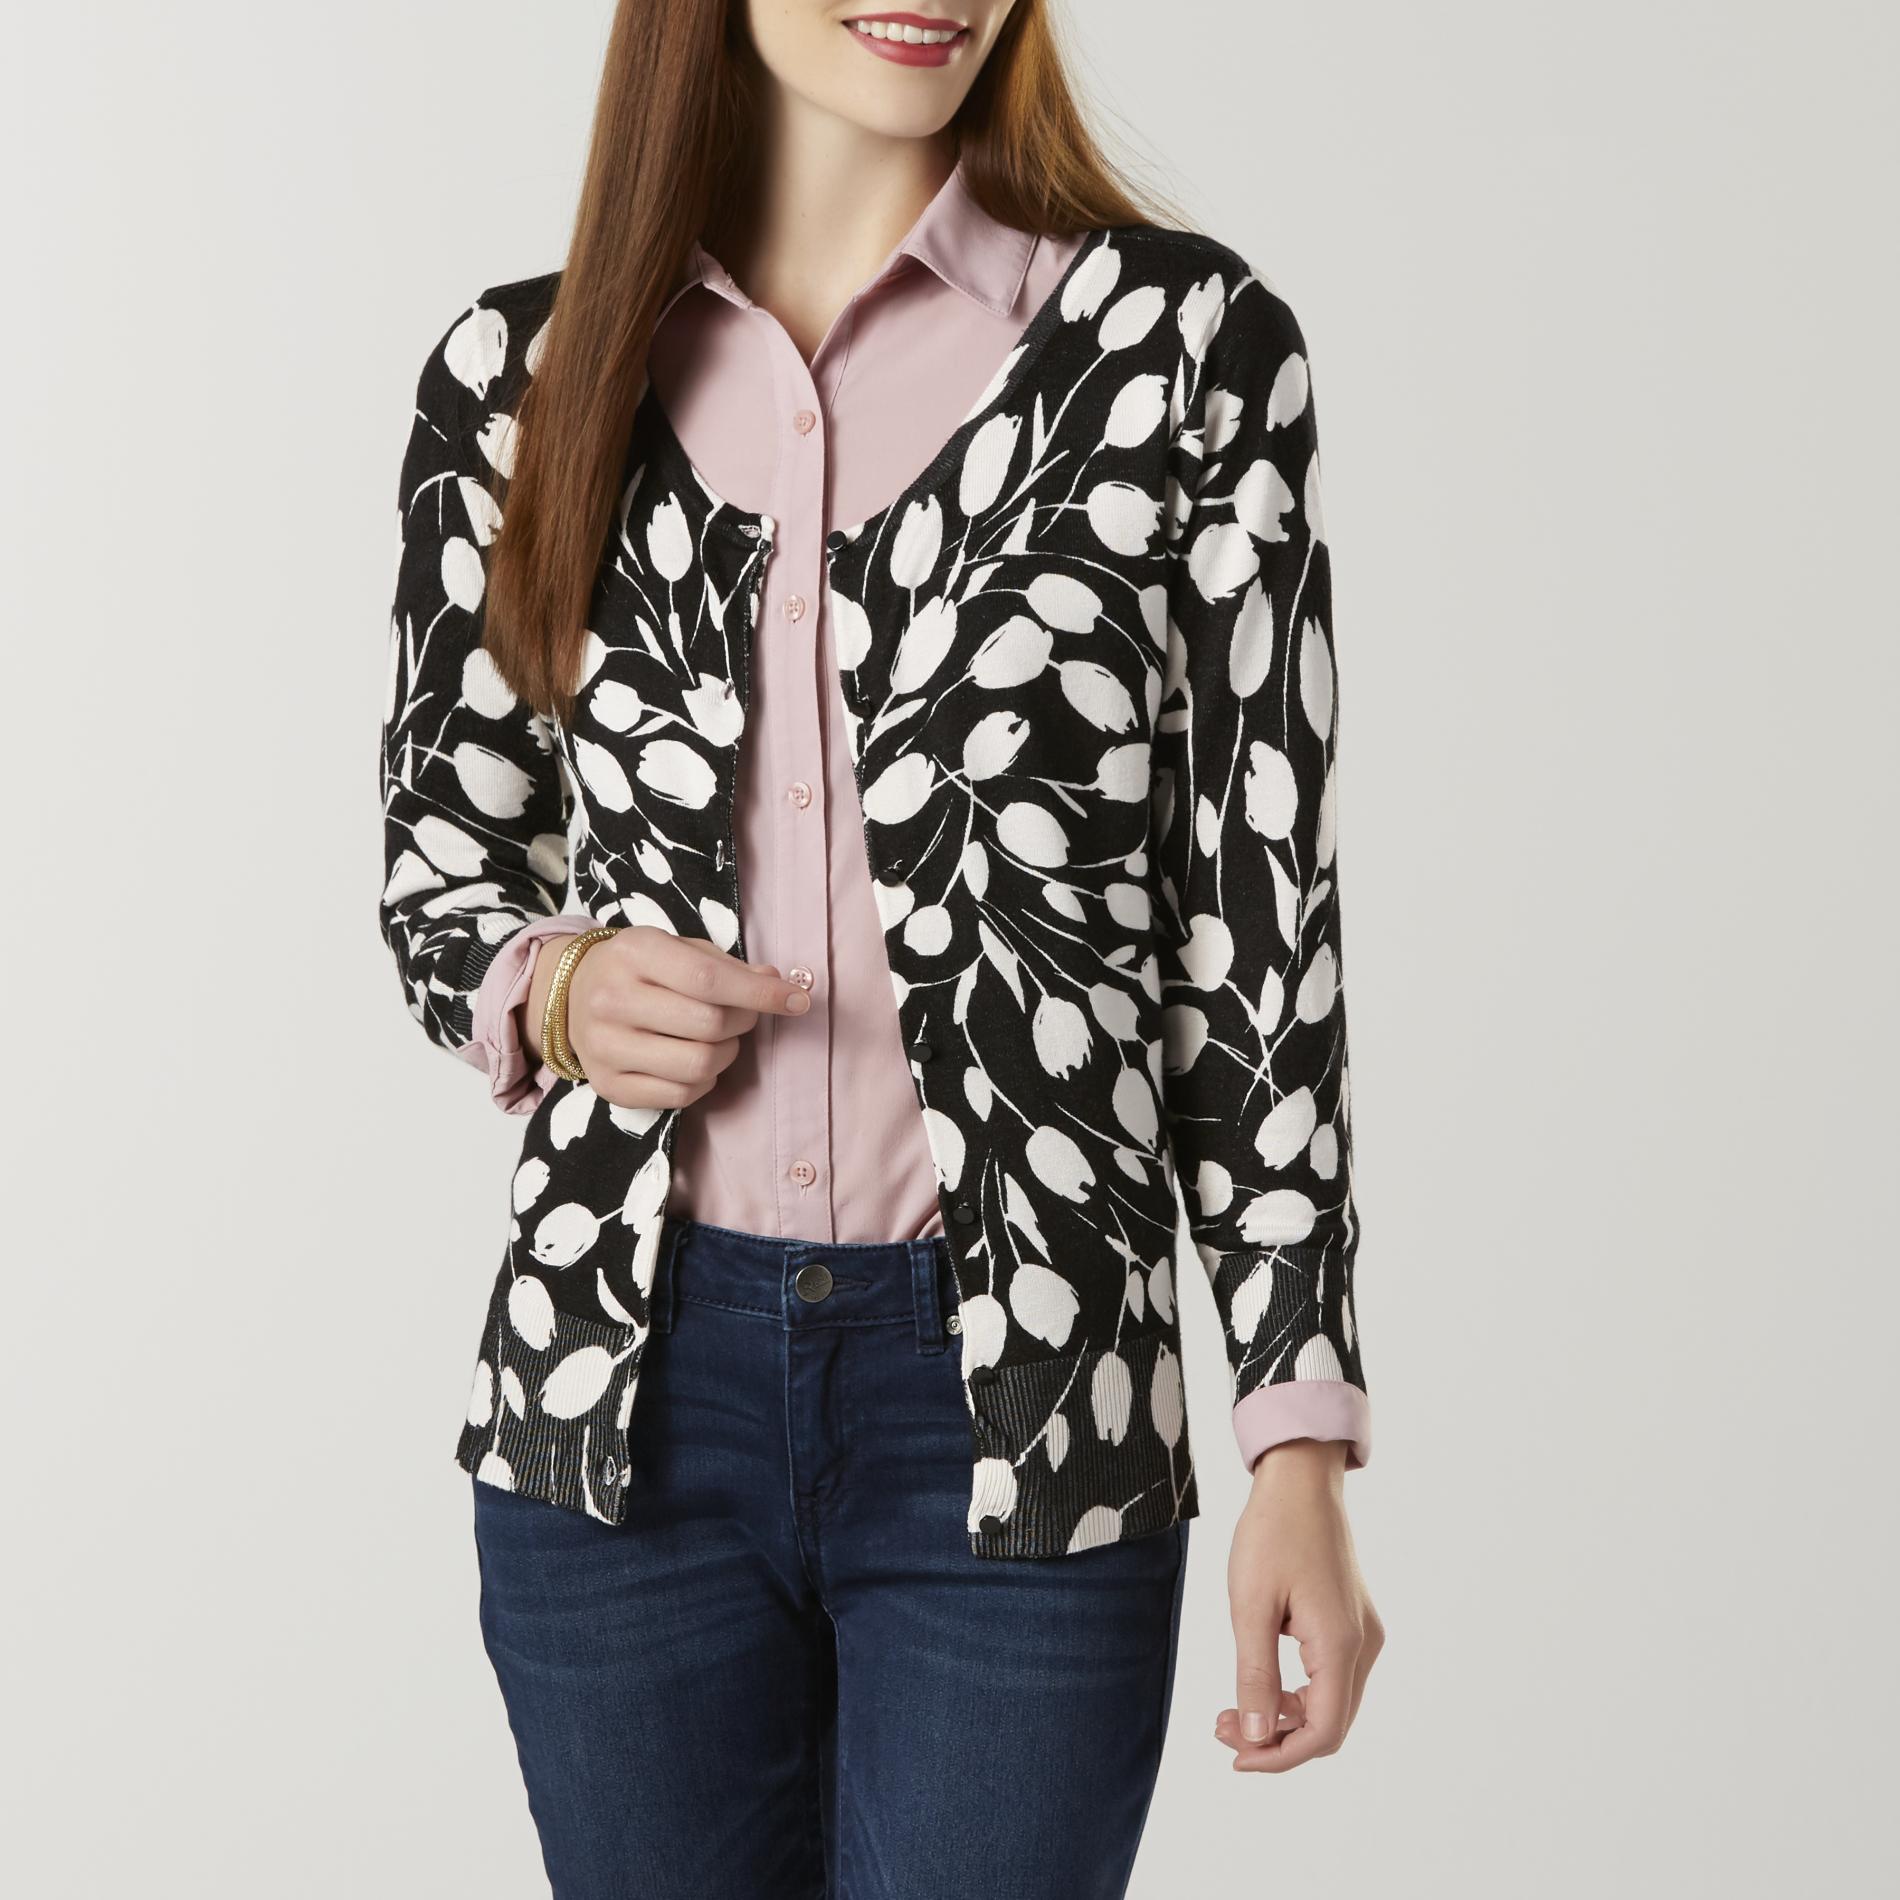 Simply Styled Women's Cardigan Sweater - Floral